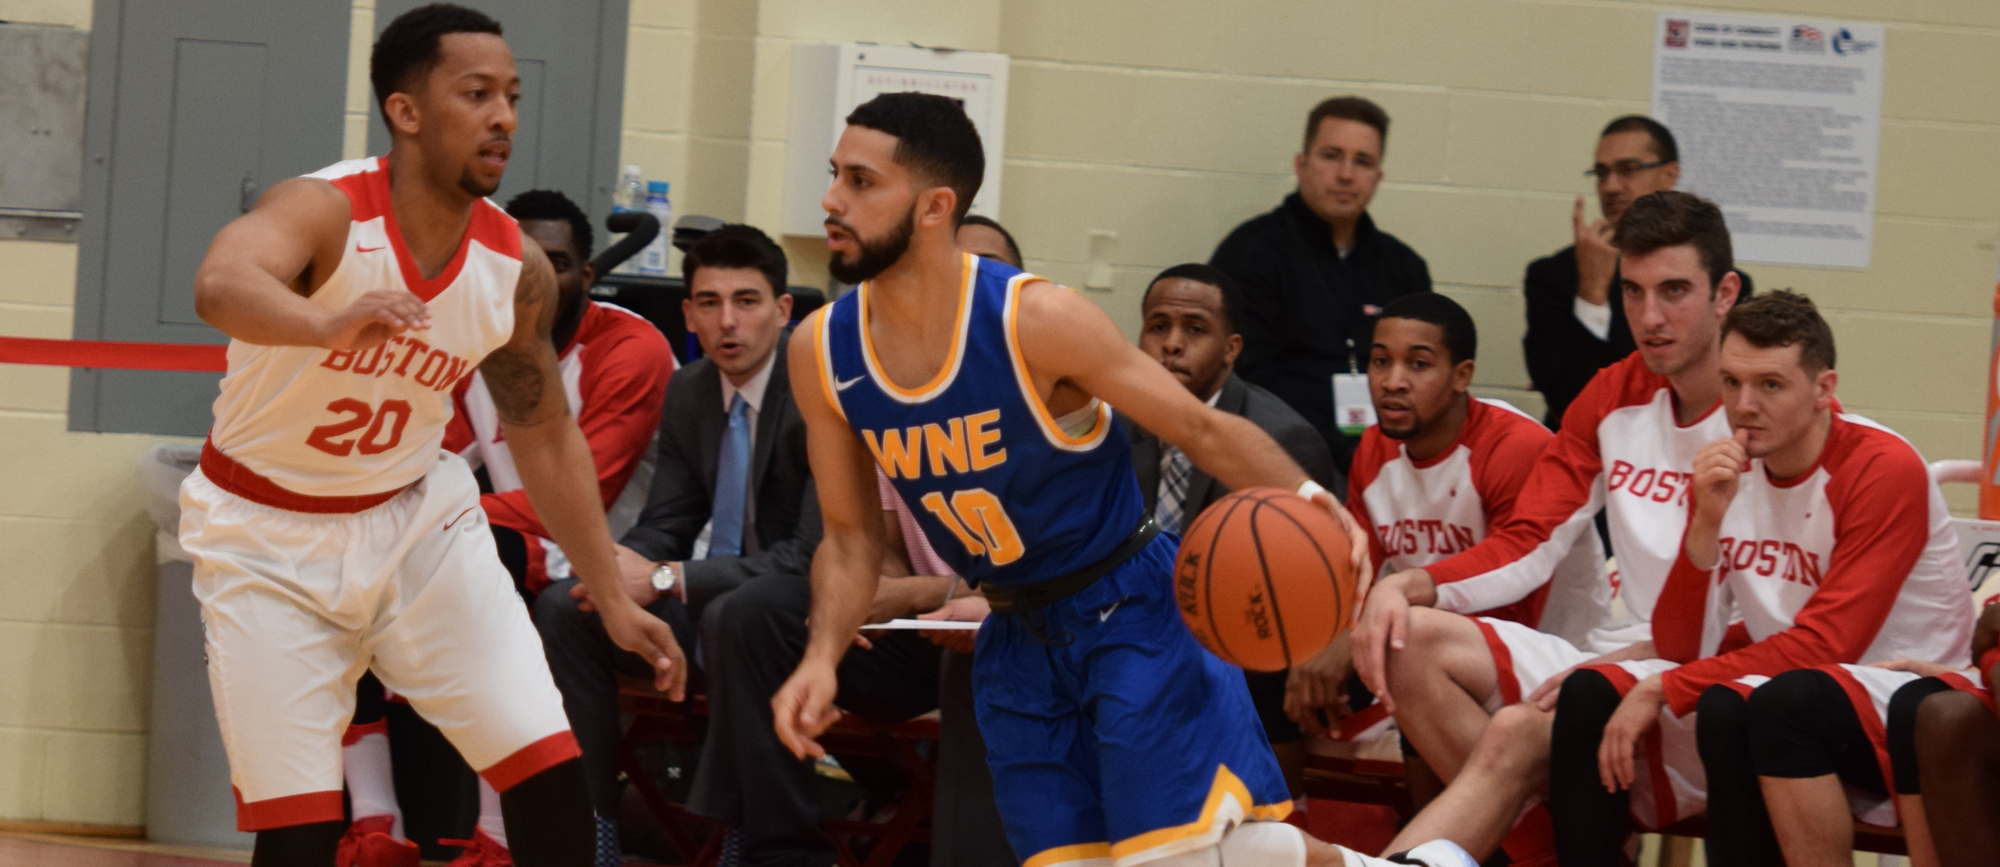 Western New England Gets Back on Track with 74-70 Win over Endicott